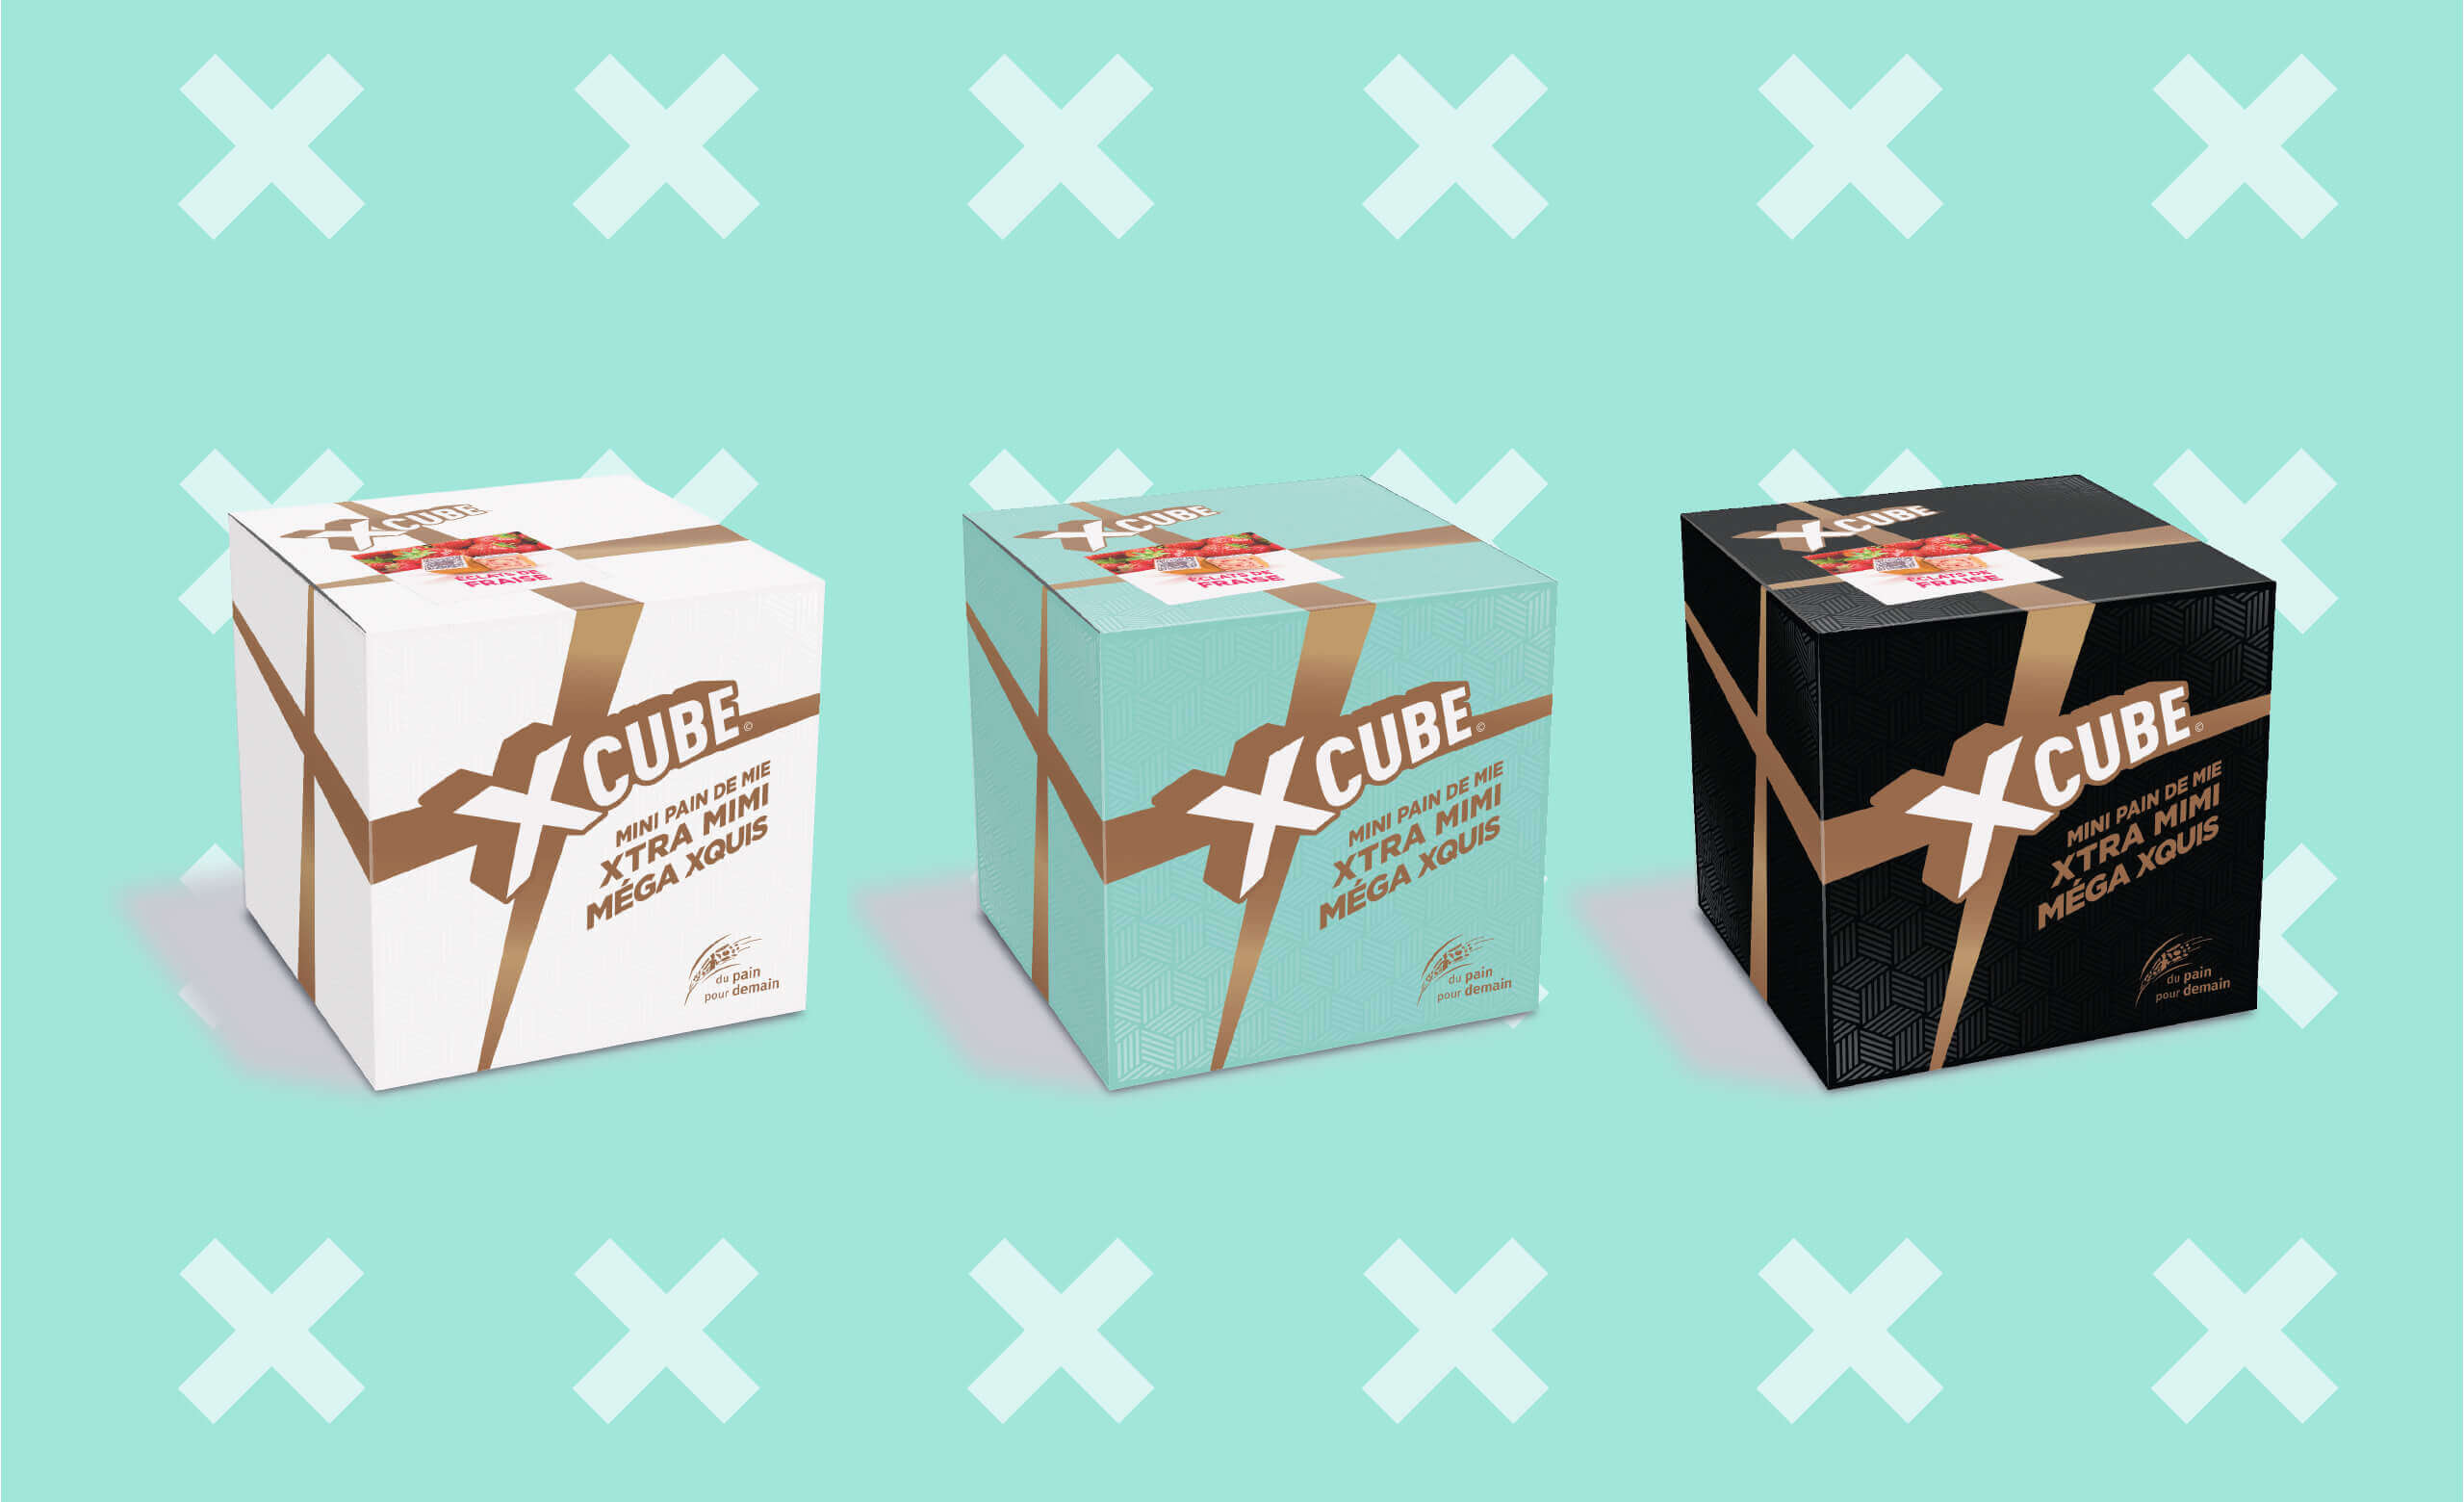 design packaging X Cube